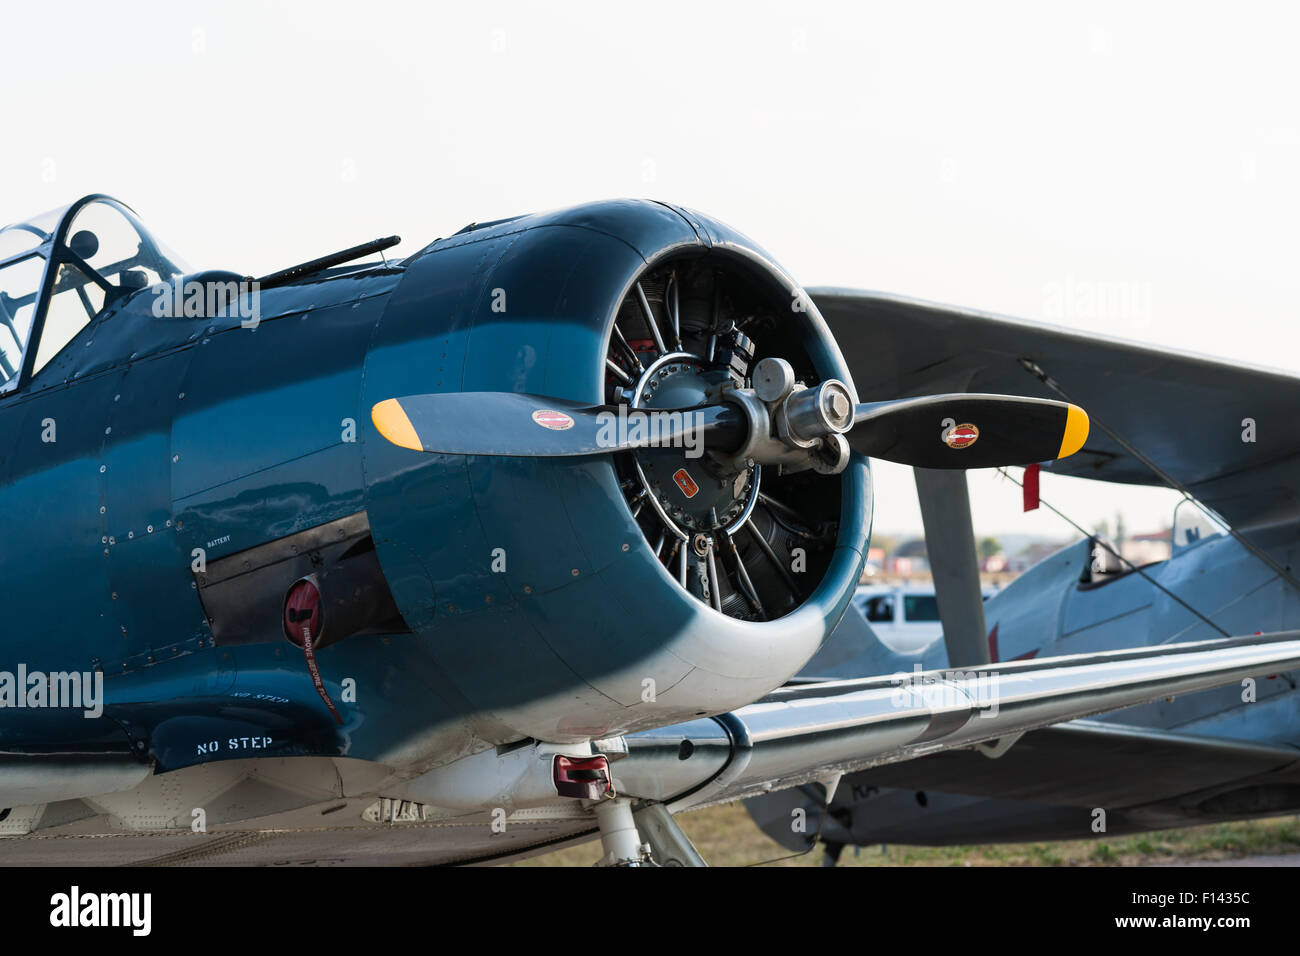 Moscow, Russia, Wednesday, August 26, 2015. The Twelfth International Moscow Aerospace Show MAKS 2015 was opened in Zhukovsky city in the Moscow Region on August 25, 2015. The aim of the show is to demonstrate Russian aerospace achievements, make contracts and negotiate international projects. North American Aviation T-6 Texan single-engined advanced trainer aircraft on display at the historic part of the air show. Credit:  Alex's Pictures/Alamy Live News Stock Photo